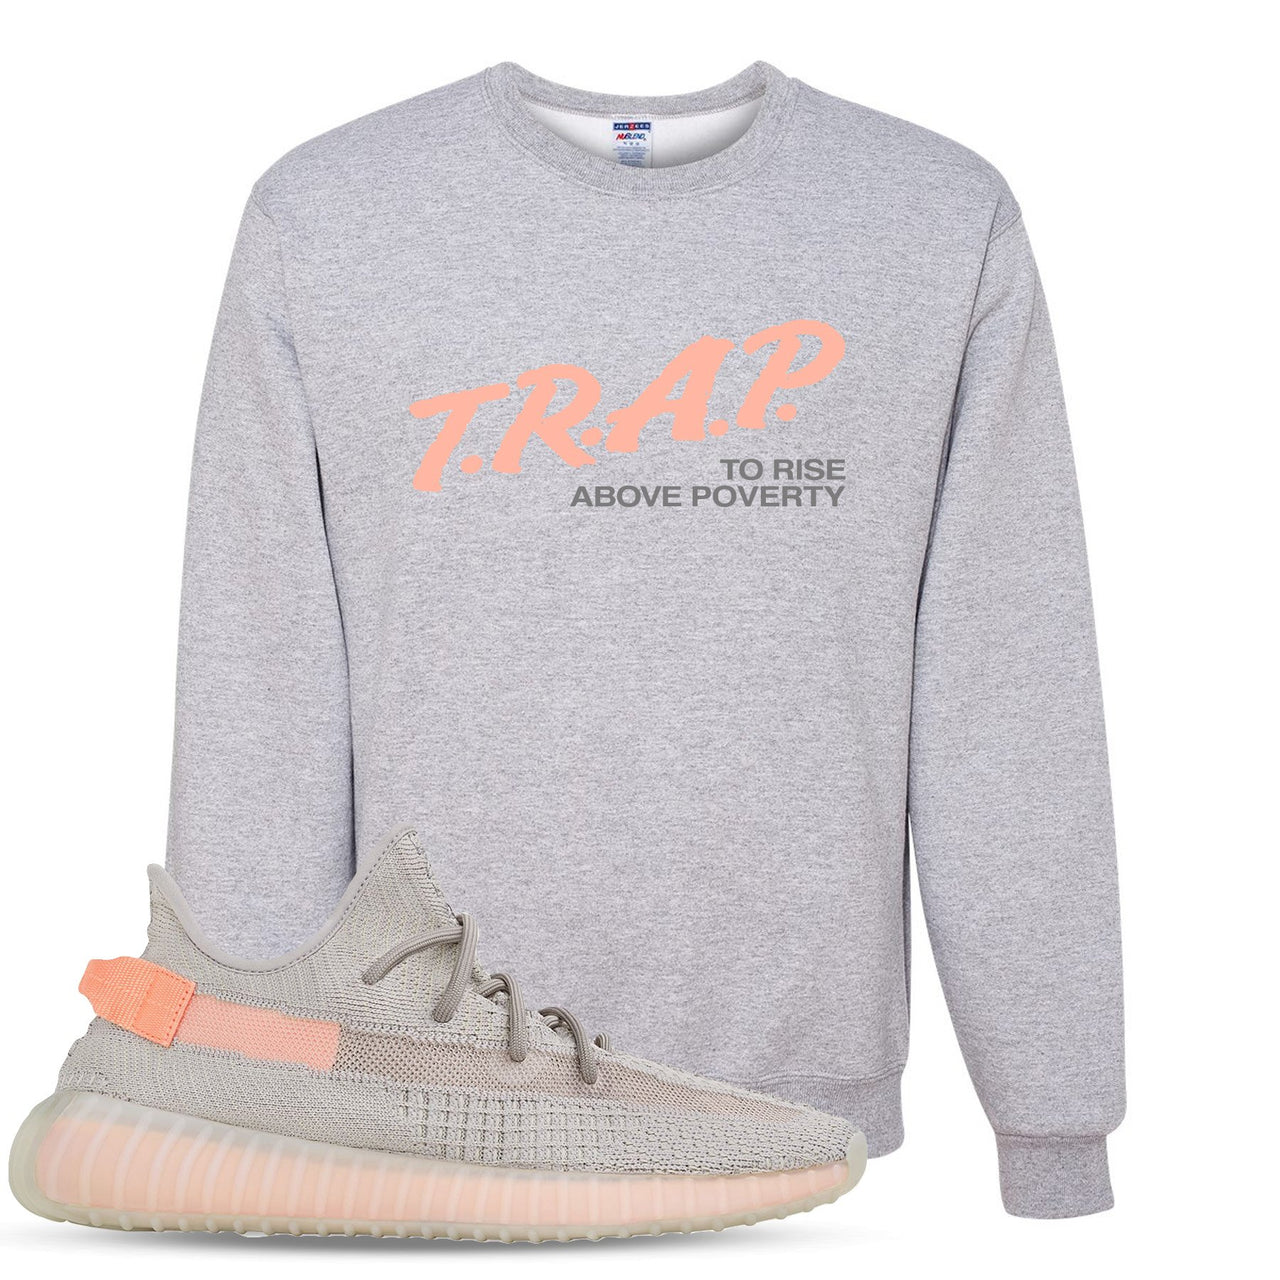 True Form v2 350s Crewneck Sweater | Trap To Rise Above Poverty, Heathered Light Gray